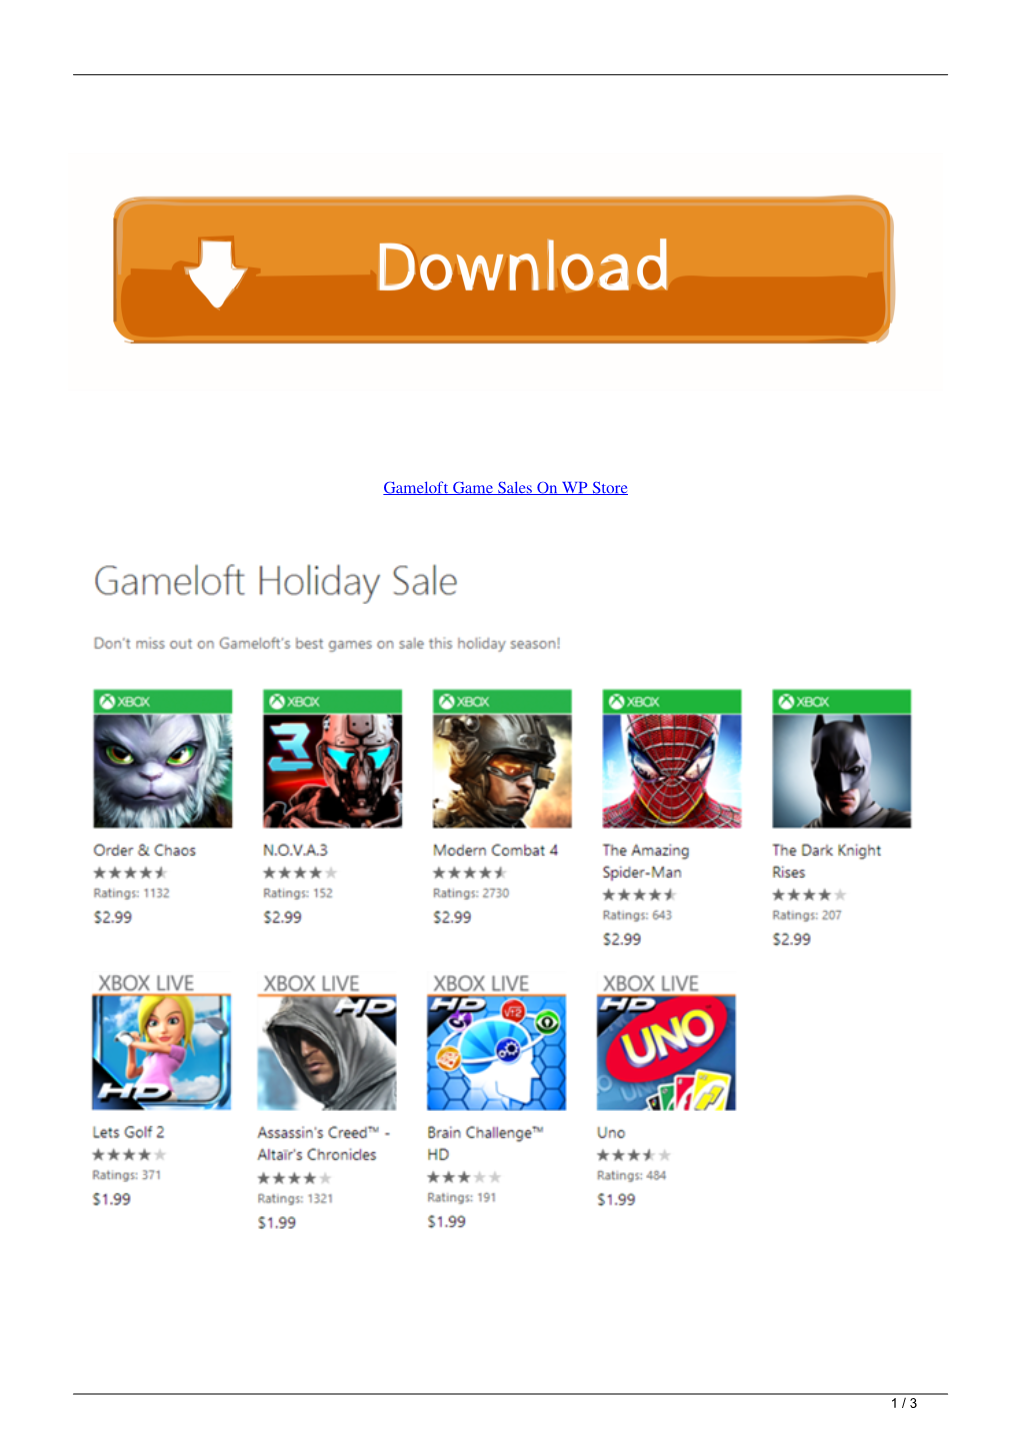 Gameloft Game Sales on WP Store